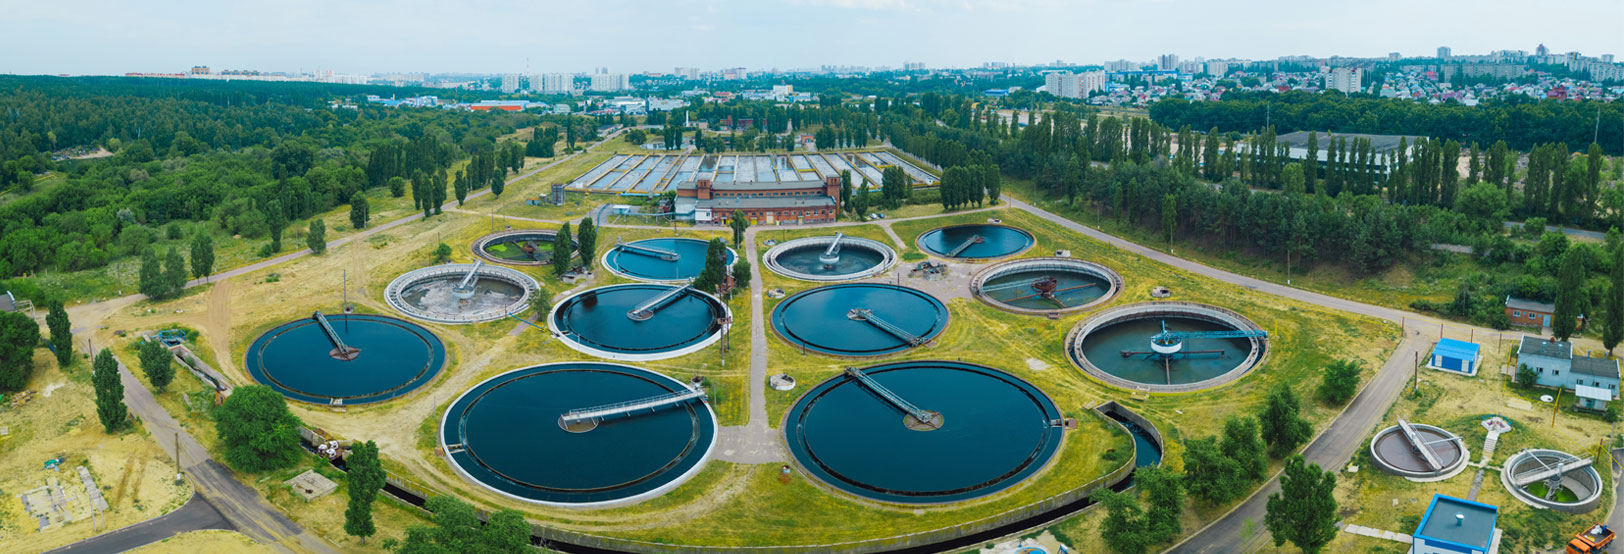 Wastewater Treatment Works